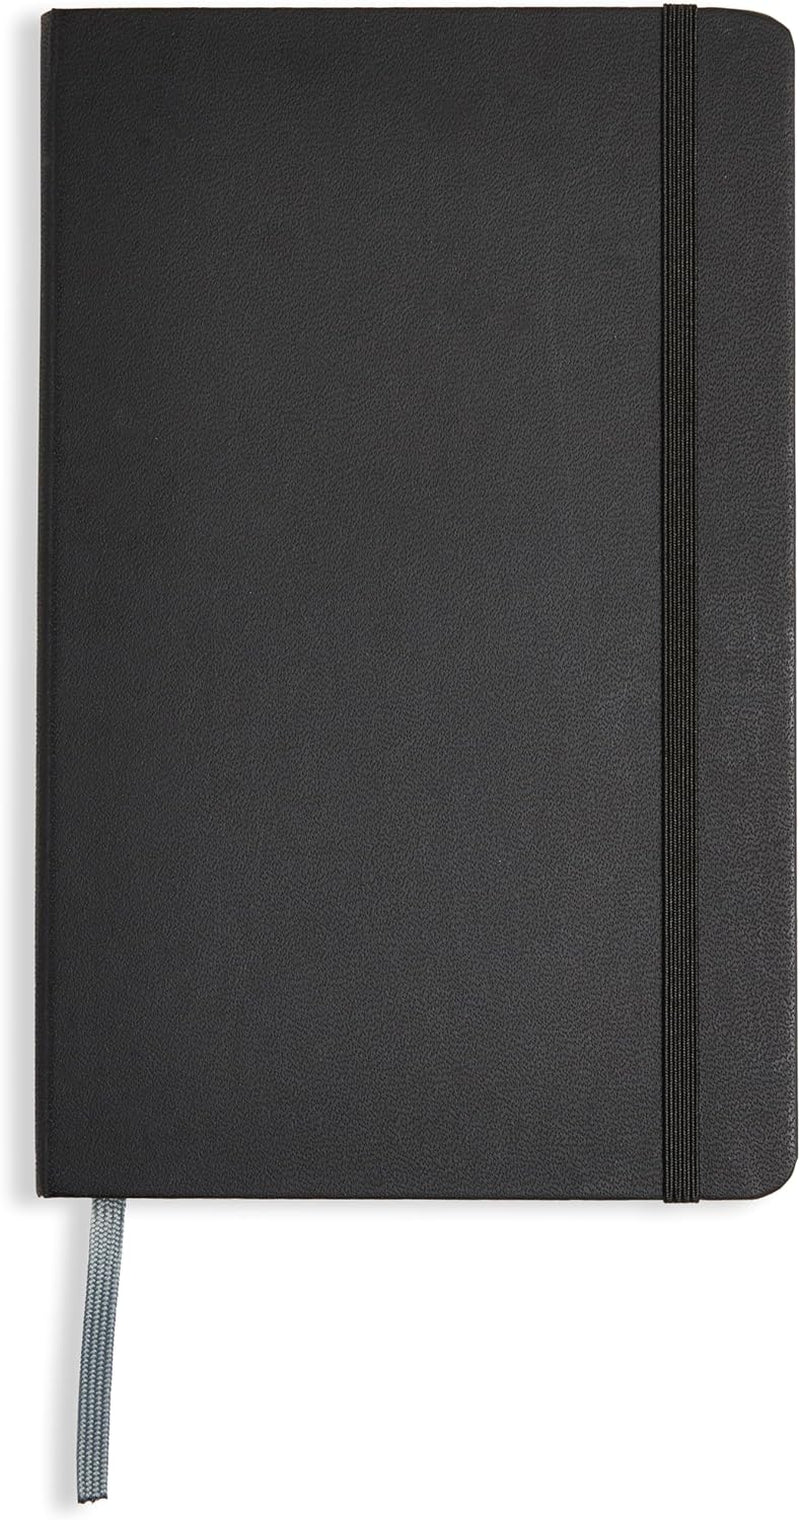 Classic Notebook, Line Ruled, 240 Pages, Black, Hardcover, 5 X 8.25-Inch